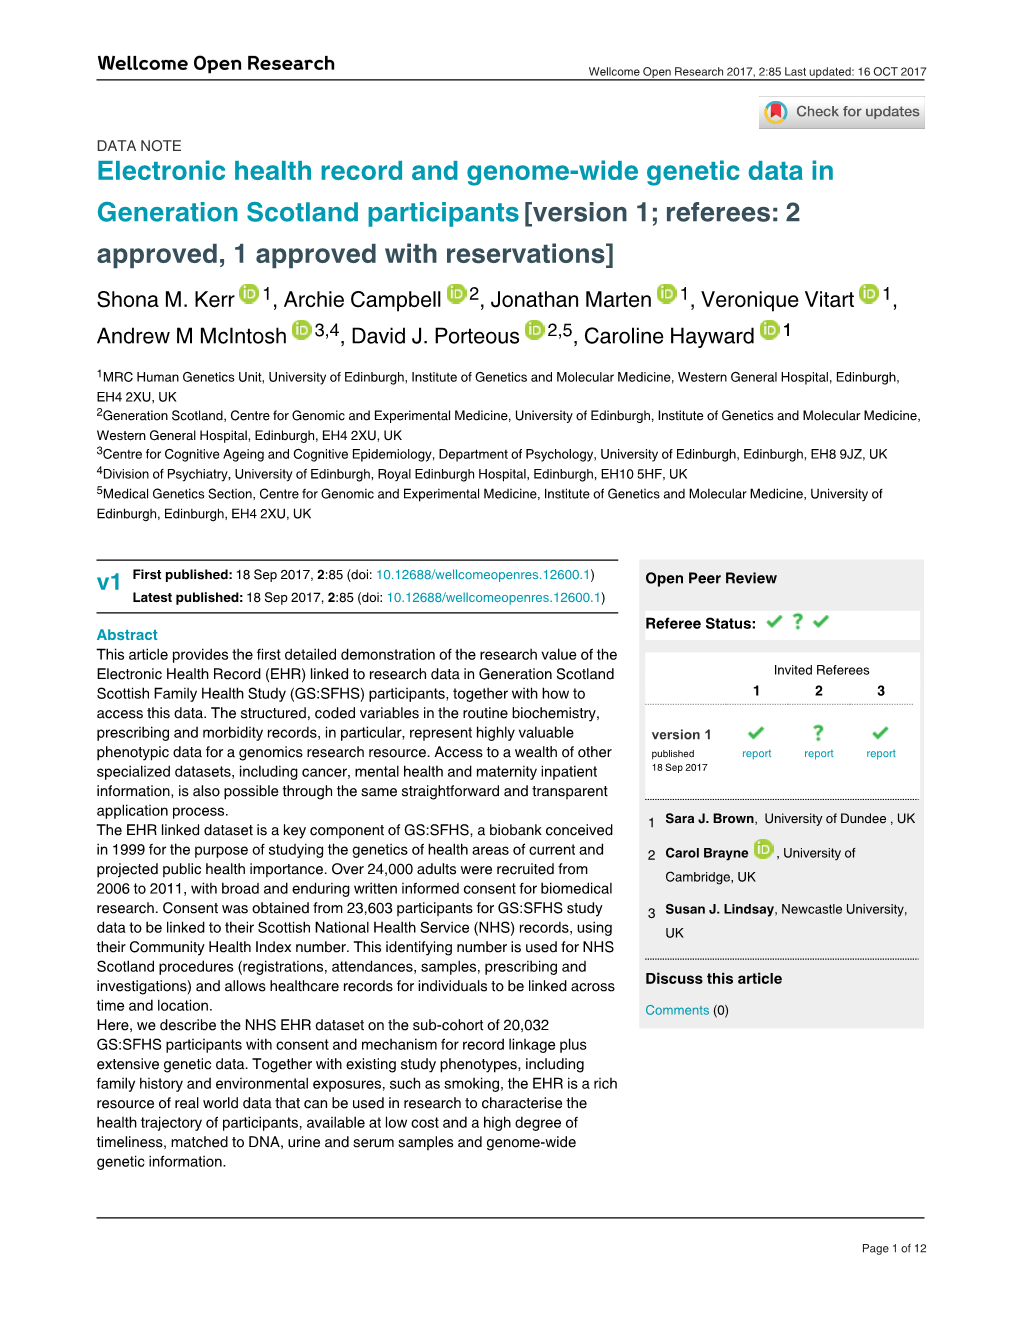 Electronic Health Record and Genome-Wide Genetic Data In